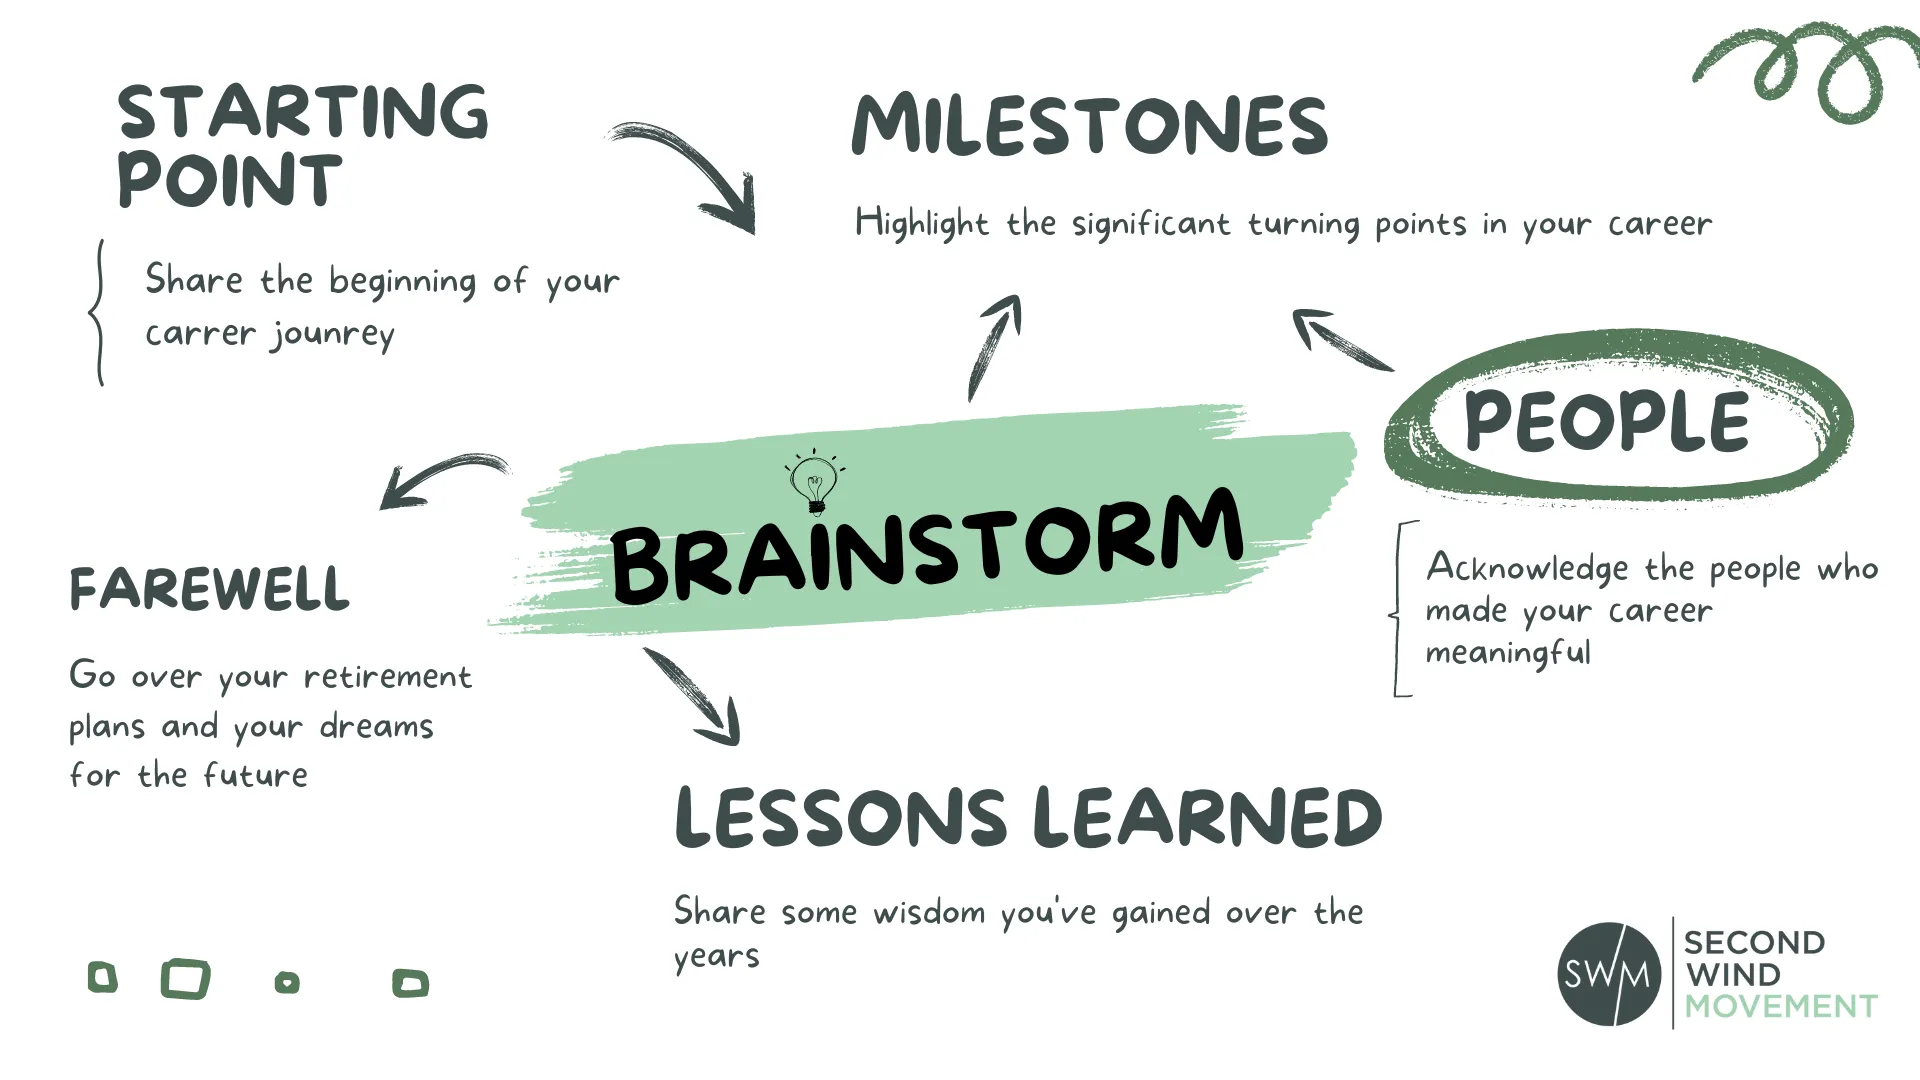 brainstorm your retirement speech by thinking about the starting point, the milestones, the people, the lessons learned and your farewell